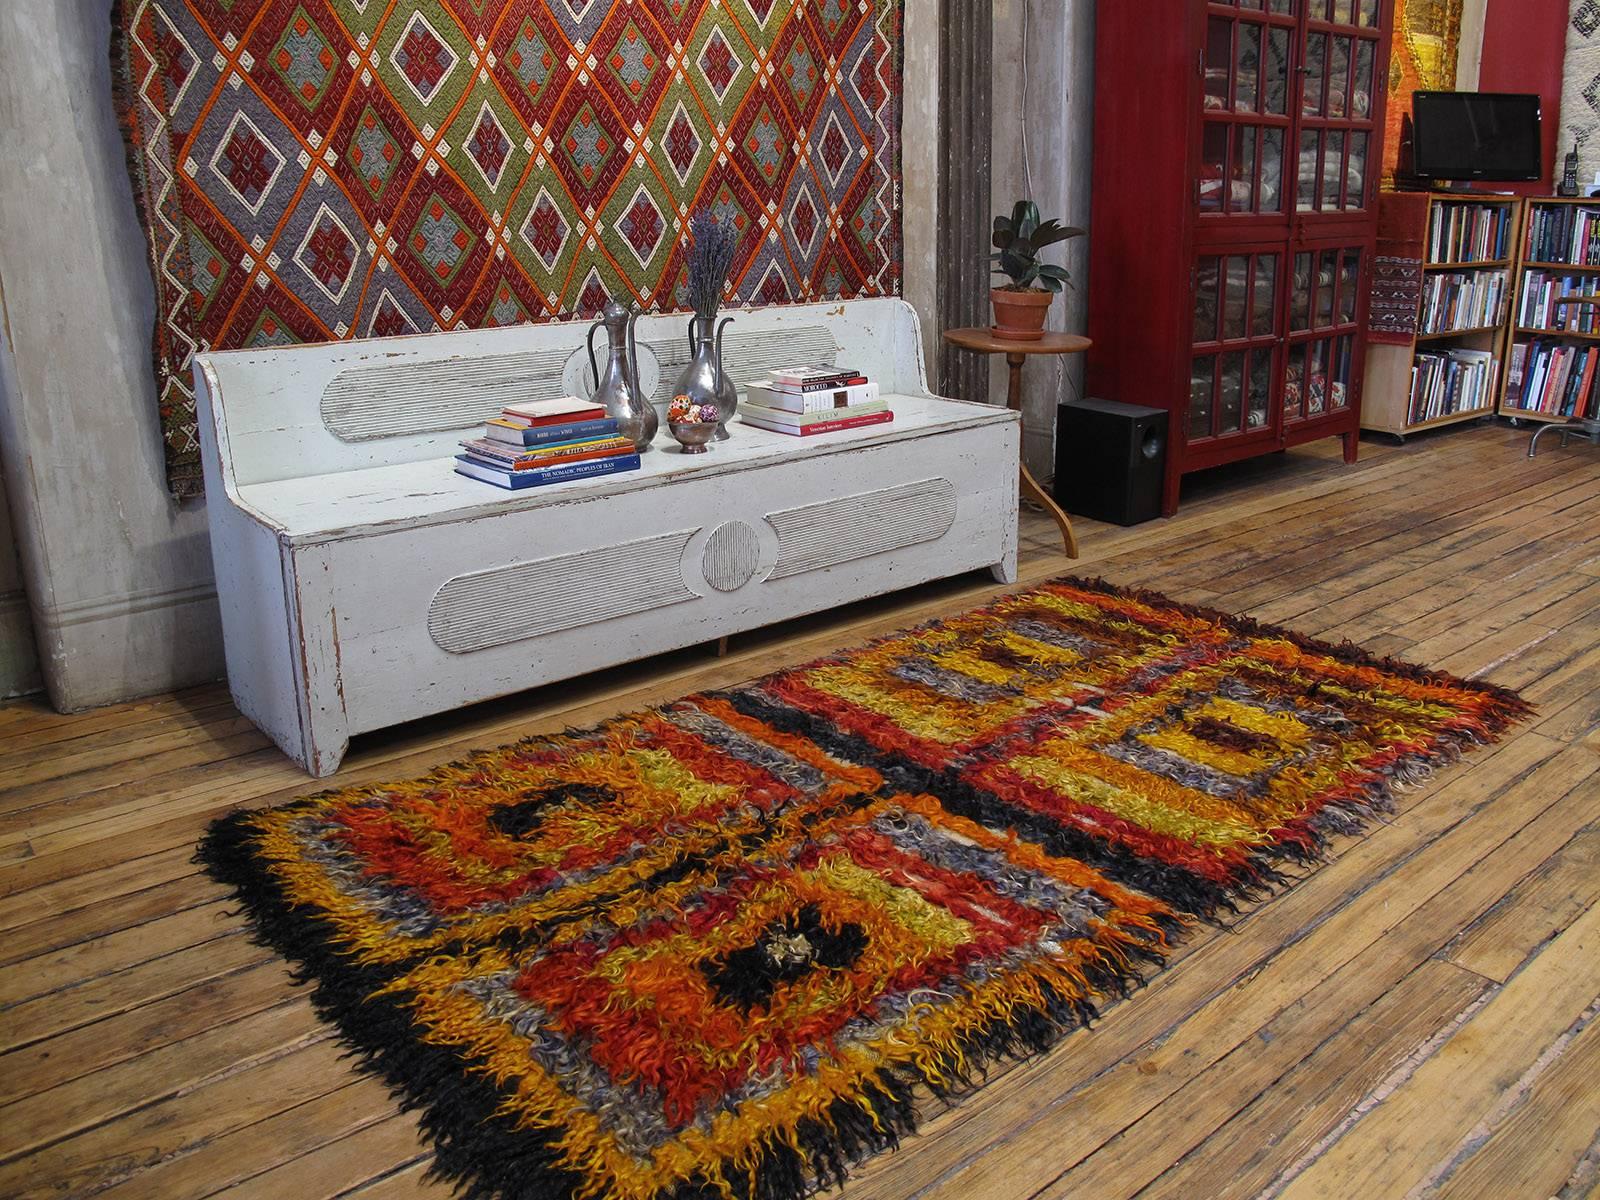 Four Squares, Angora Tulu rug. An old tribal rug from West Central Turkey, coarsely woven with long strands of colorful angora goat hair (mohair). Such rugs were used as beds, blankets and wall covers to provide warmth and comfort in village homes.